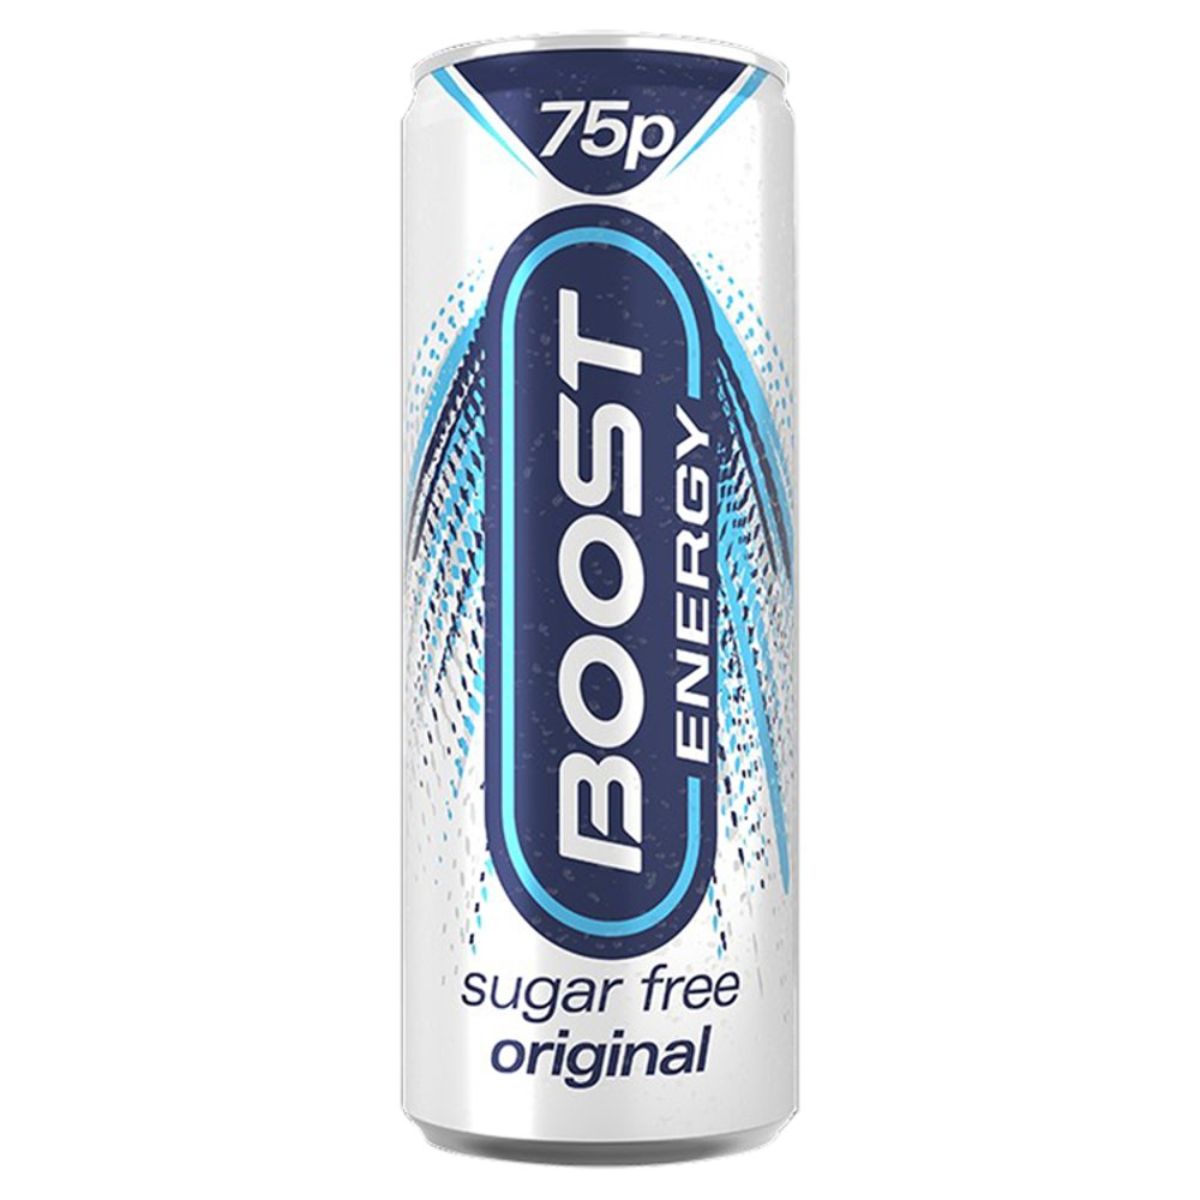 A can of Boost - Energy Sugar Free Original - 250ml on a white background.